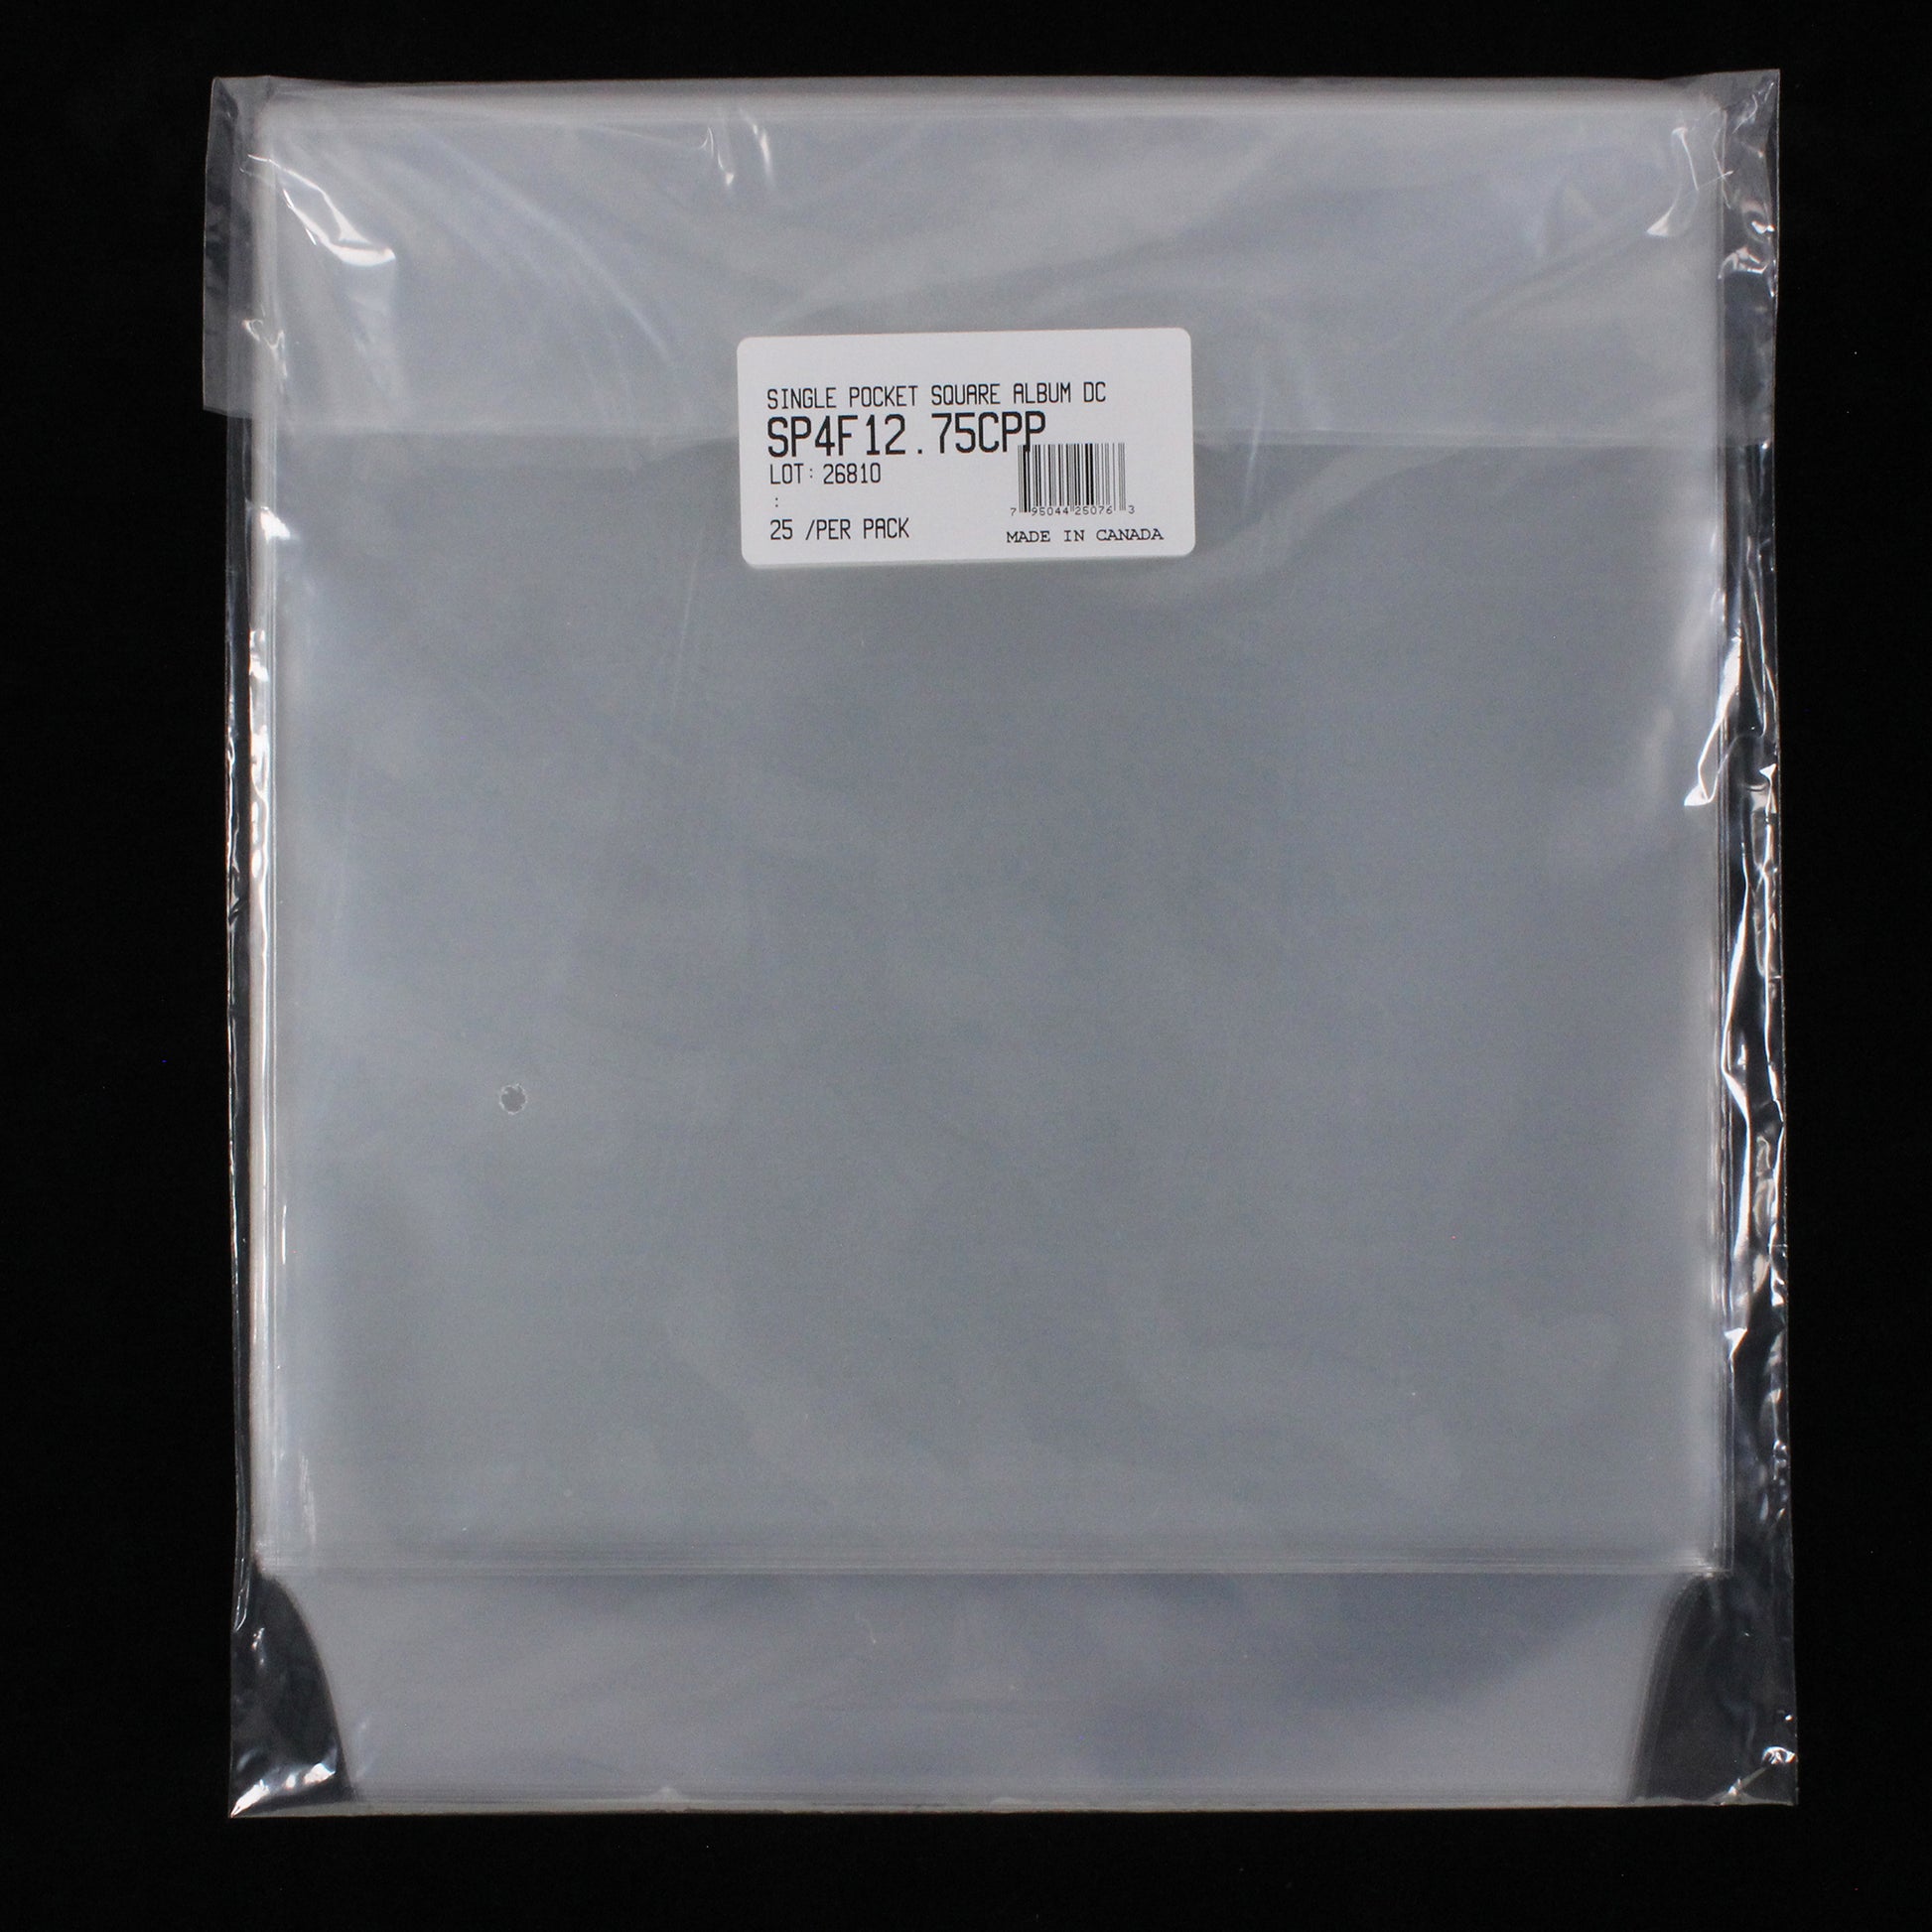 12.75" Single Pocket Outer Sleeves w/ Flap - 4mil (25 pack) - Vinyl Storage Solutions